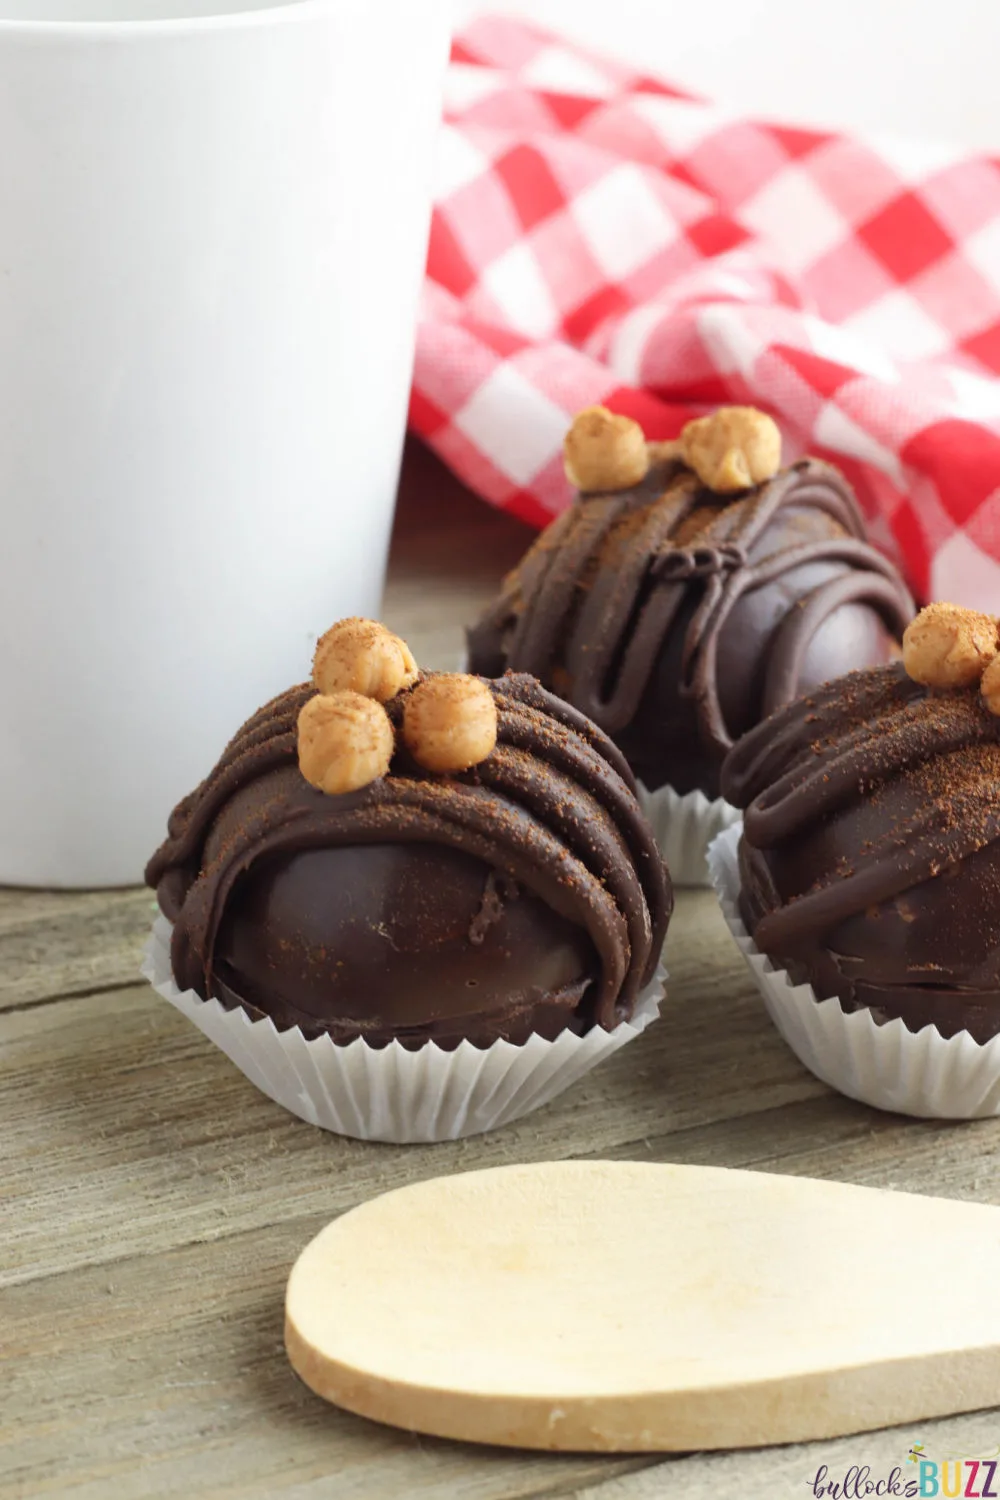 This mouth-watering Caramel Mocha Coffee Bomb recipe makes for a tasty start to your day! #coffeebomb #espressobomb #recipes #caramelmocha #coffee